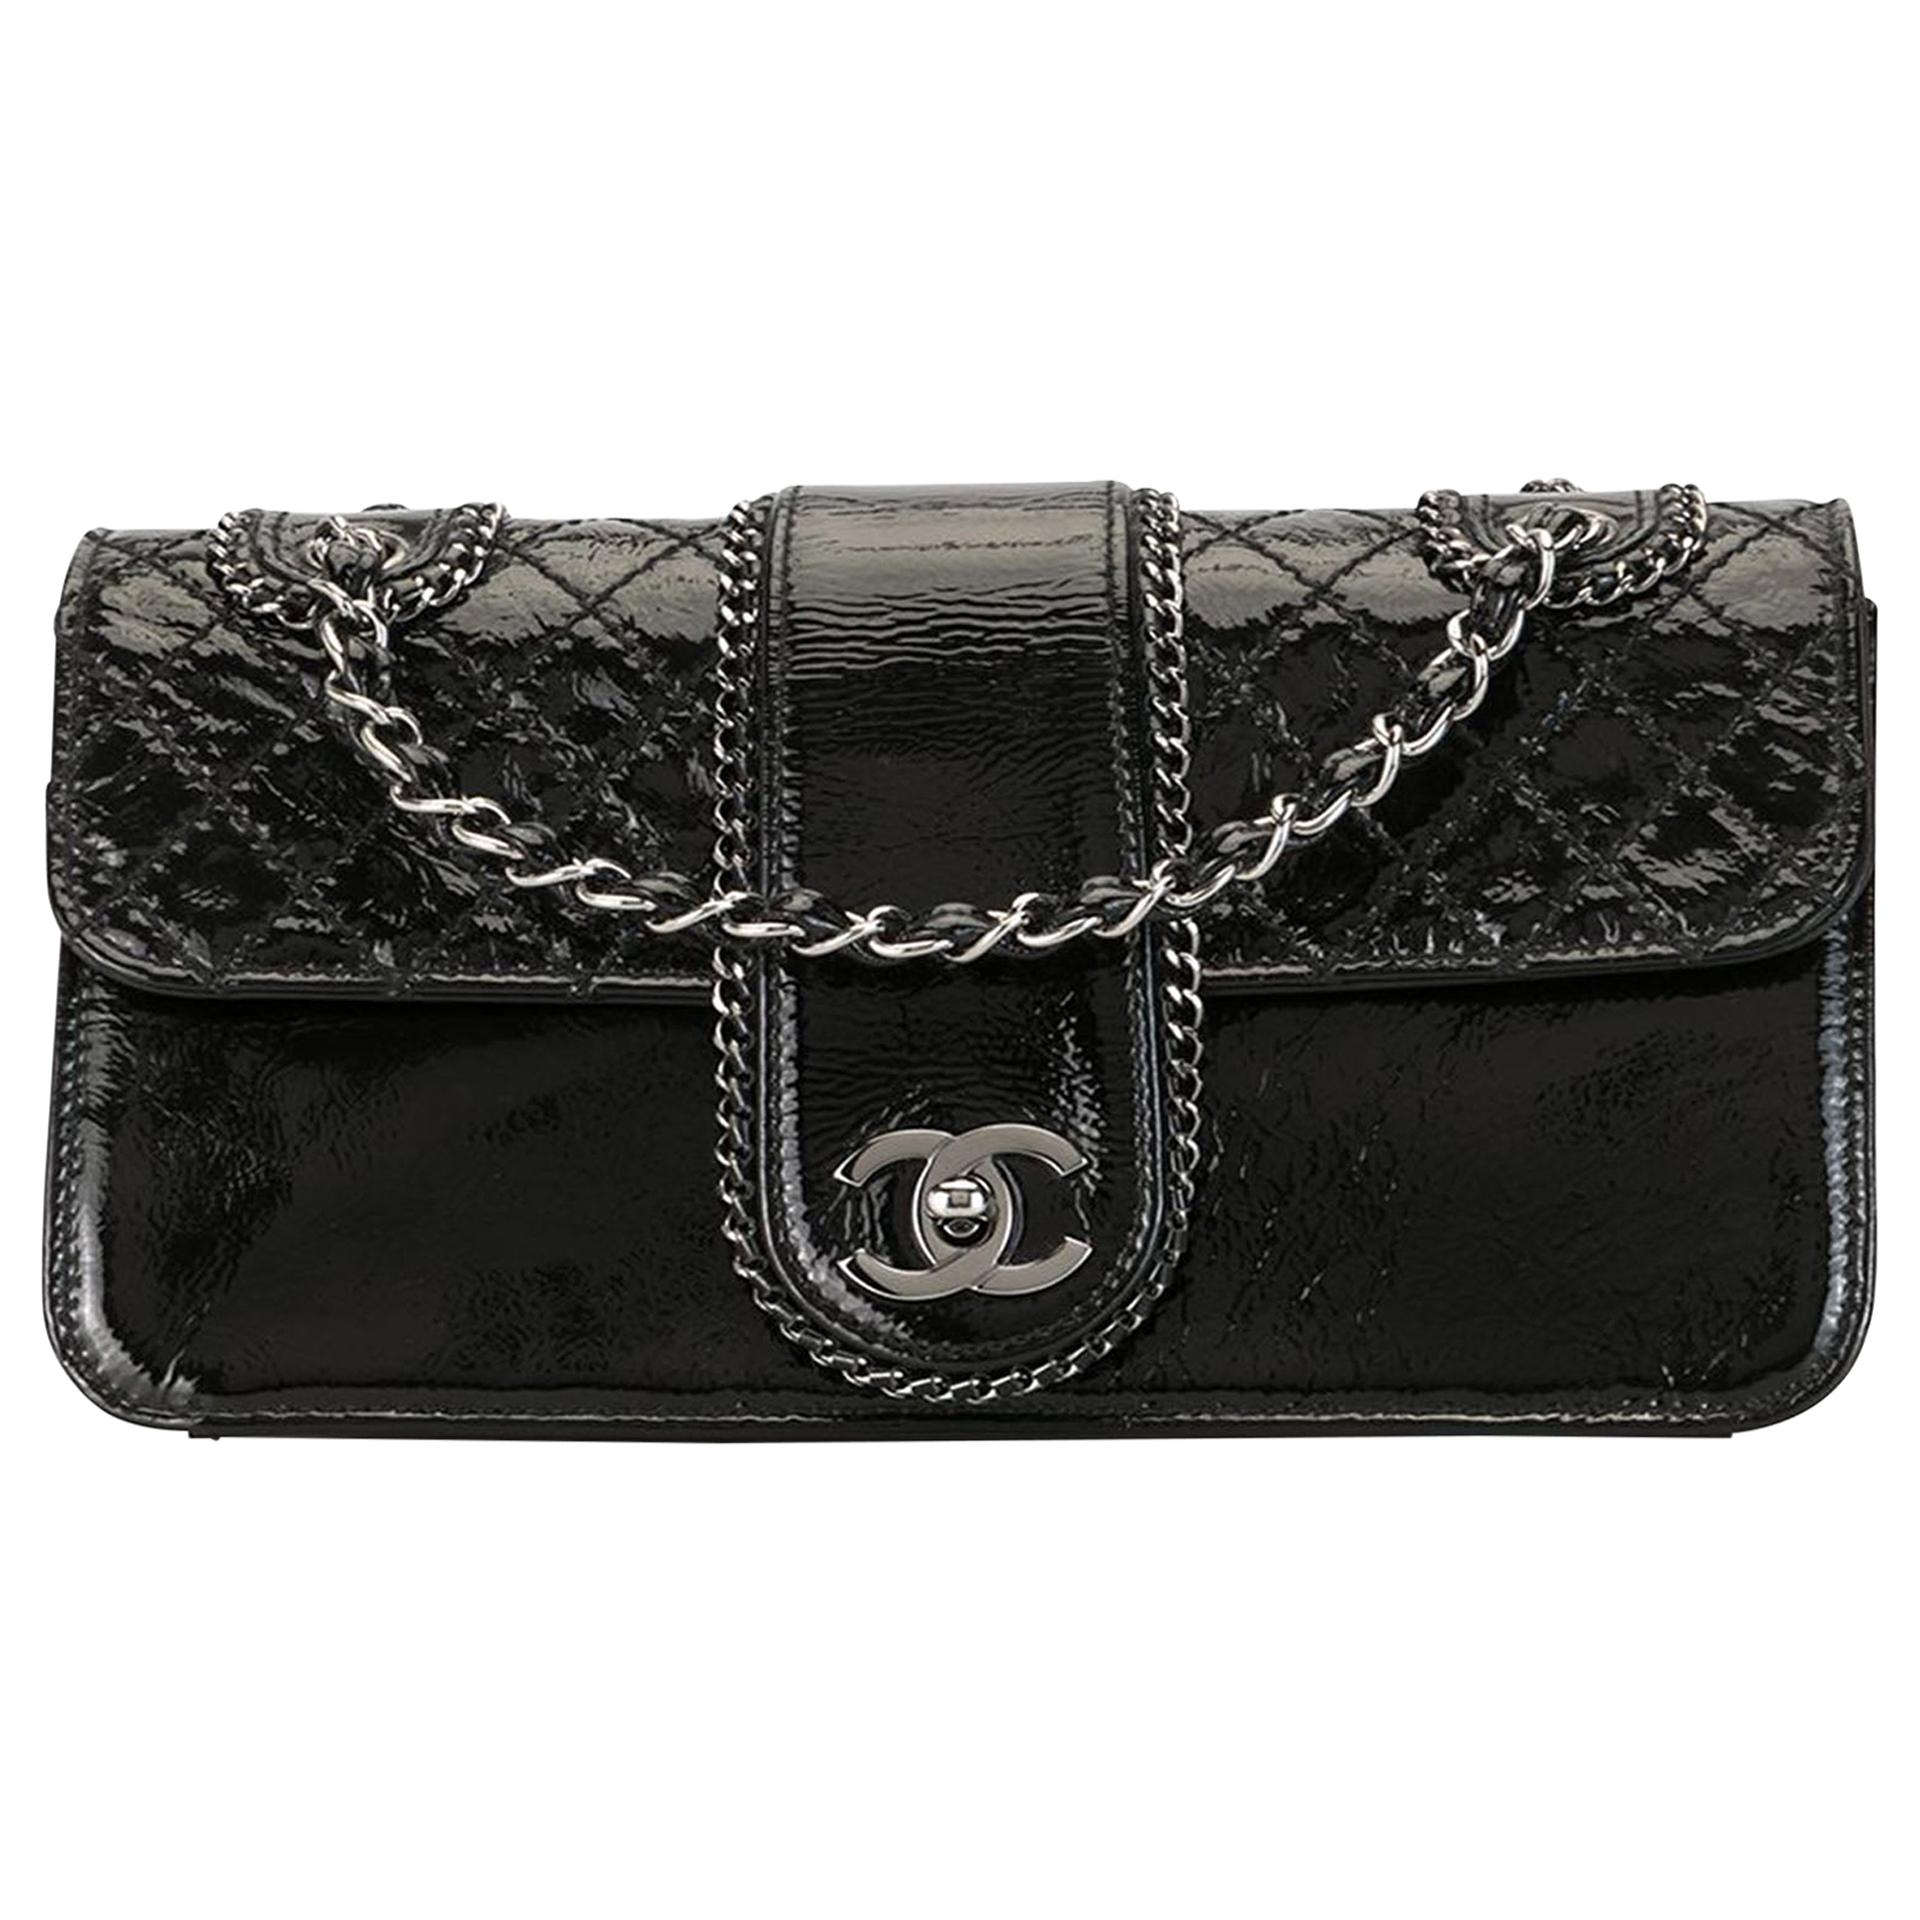 Chanel Madison Flap Bag Quilted Patent Medium